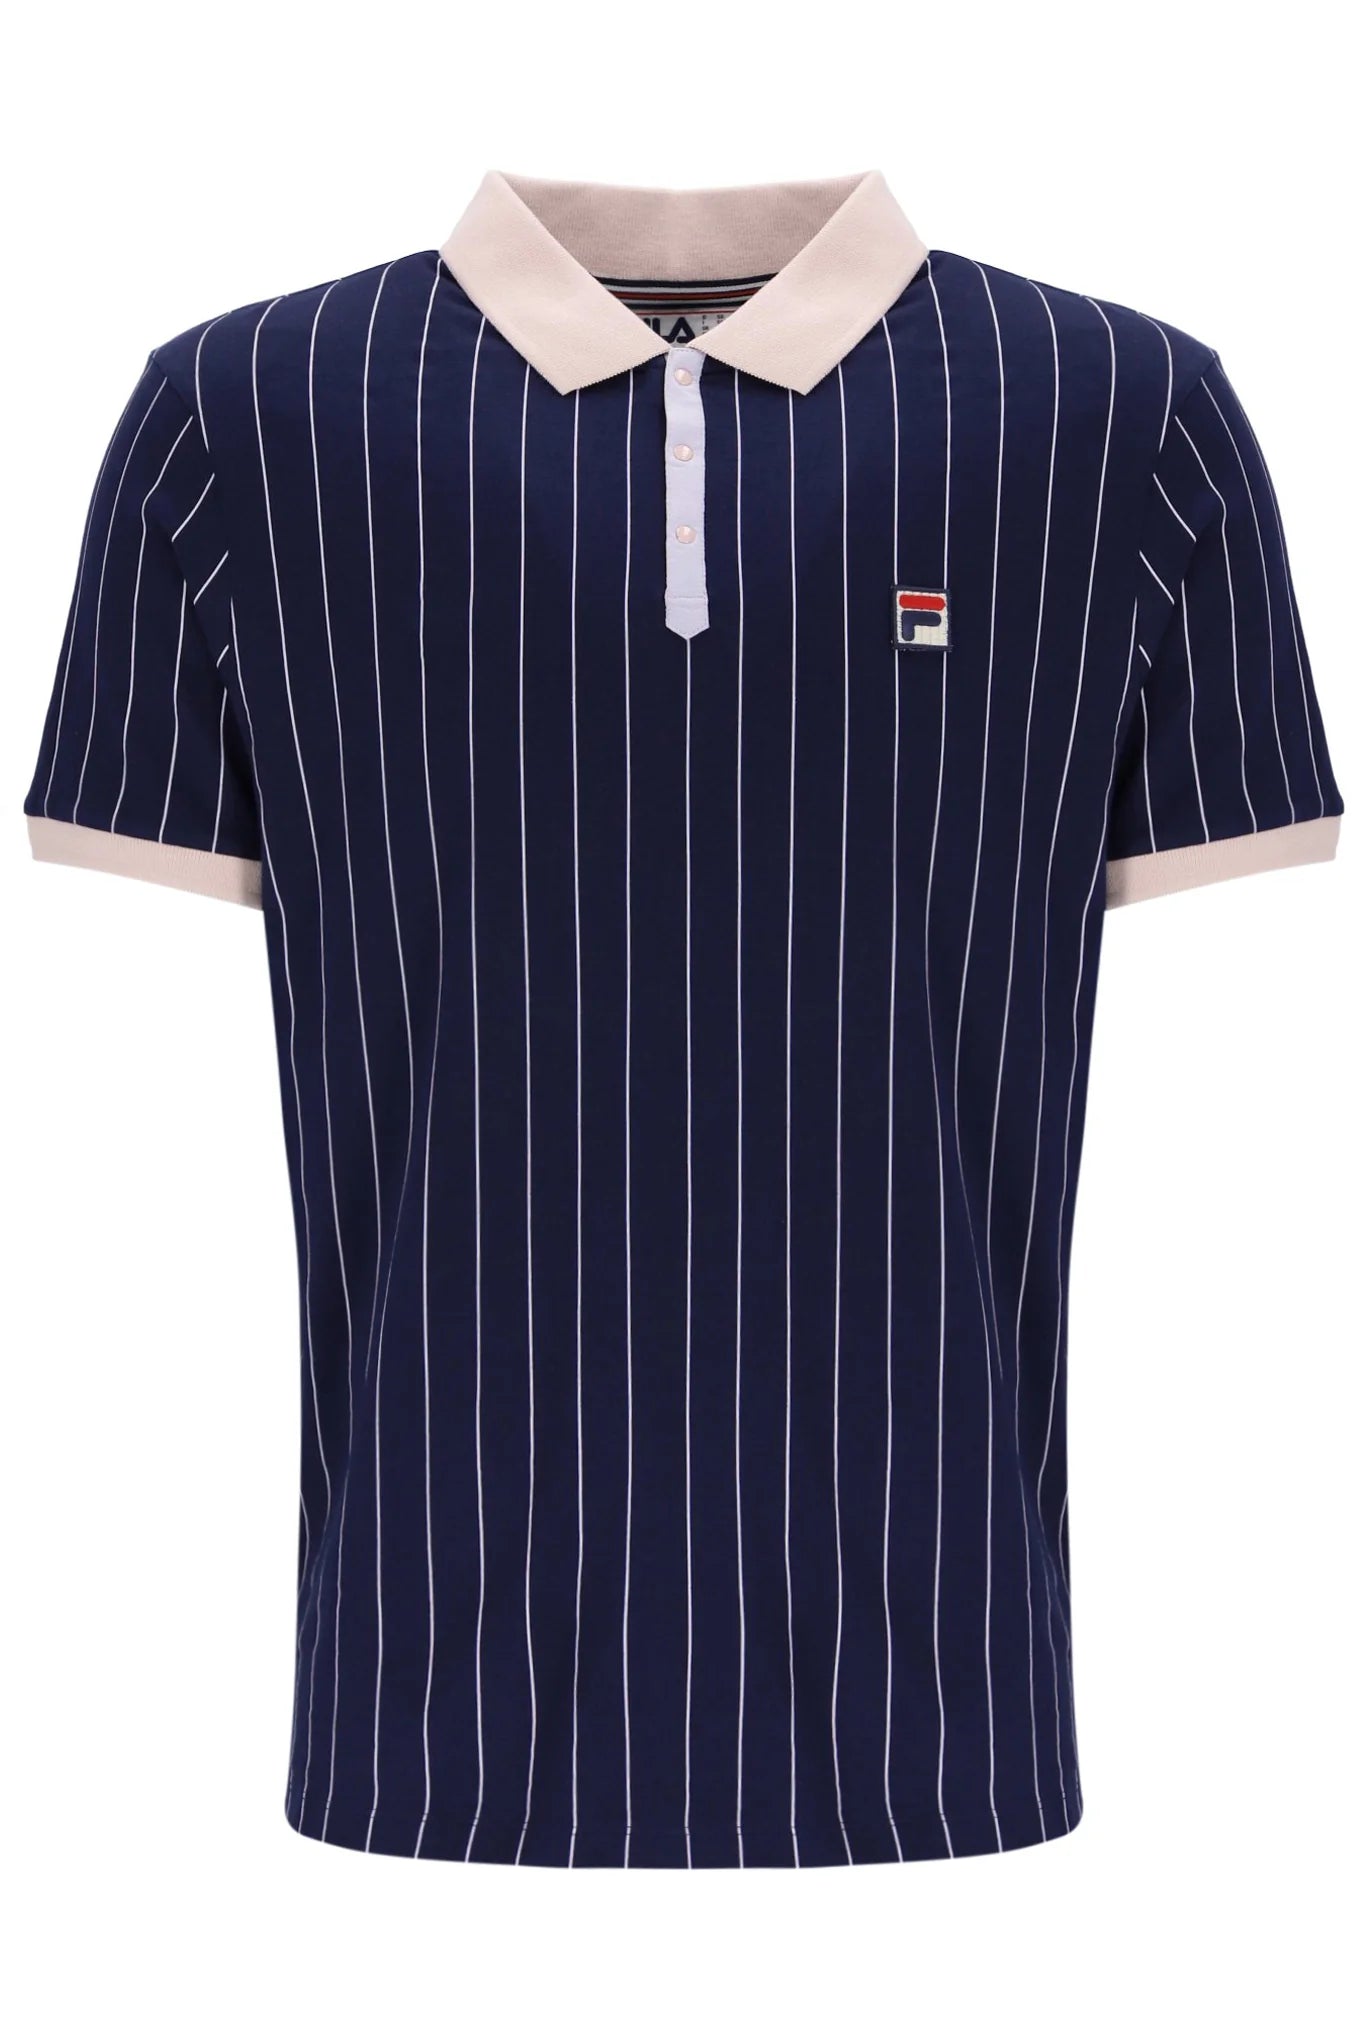 Fila BB1 Classic Vintage Striped Polo in Navy/Peach Whip/Thistle - LM1839AT-412